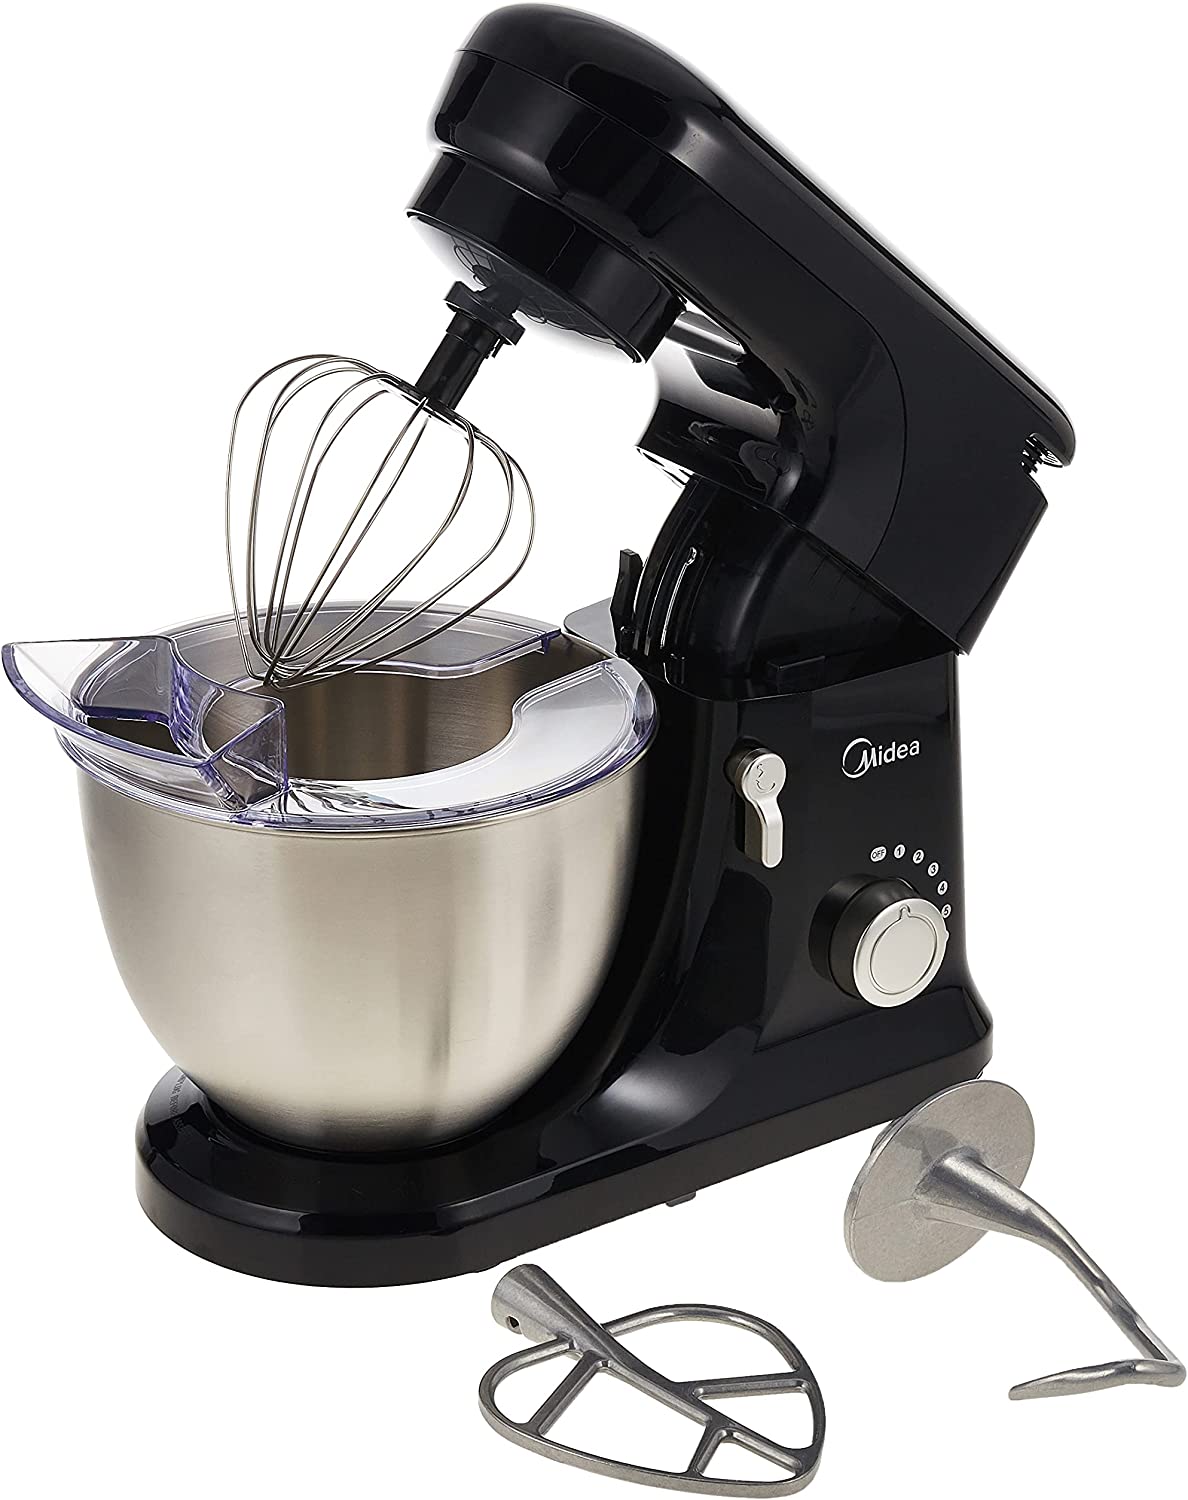 Midea Stand Mixer Kitchen Machine With 4.5 Liters Stainless Steel Bowl &amp; Powerful 400W Motor, 7 Speeds, Metallic Dough Hook, Whisk &amp; Beater For Kneading-Whipping-Mixing, Best For Home Bakers, BM2098A2